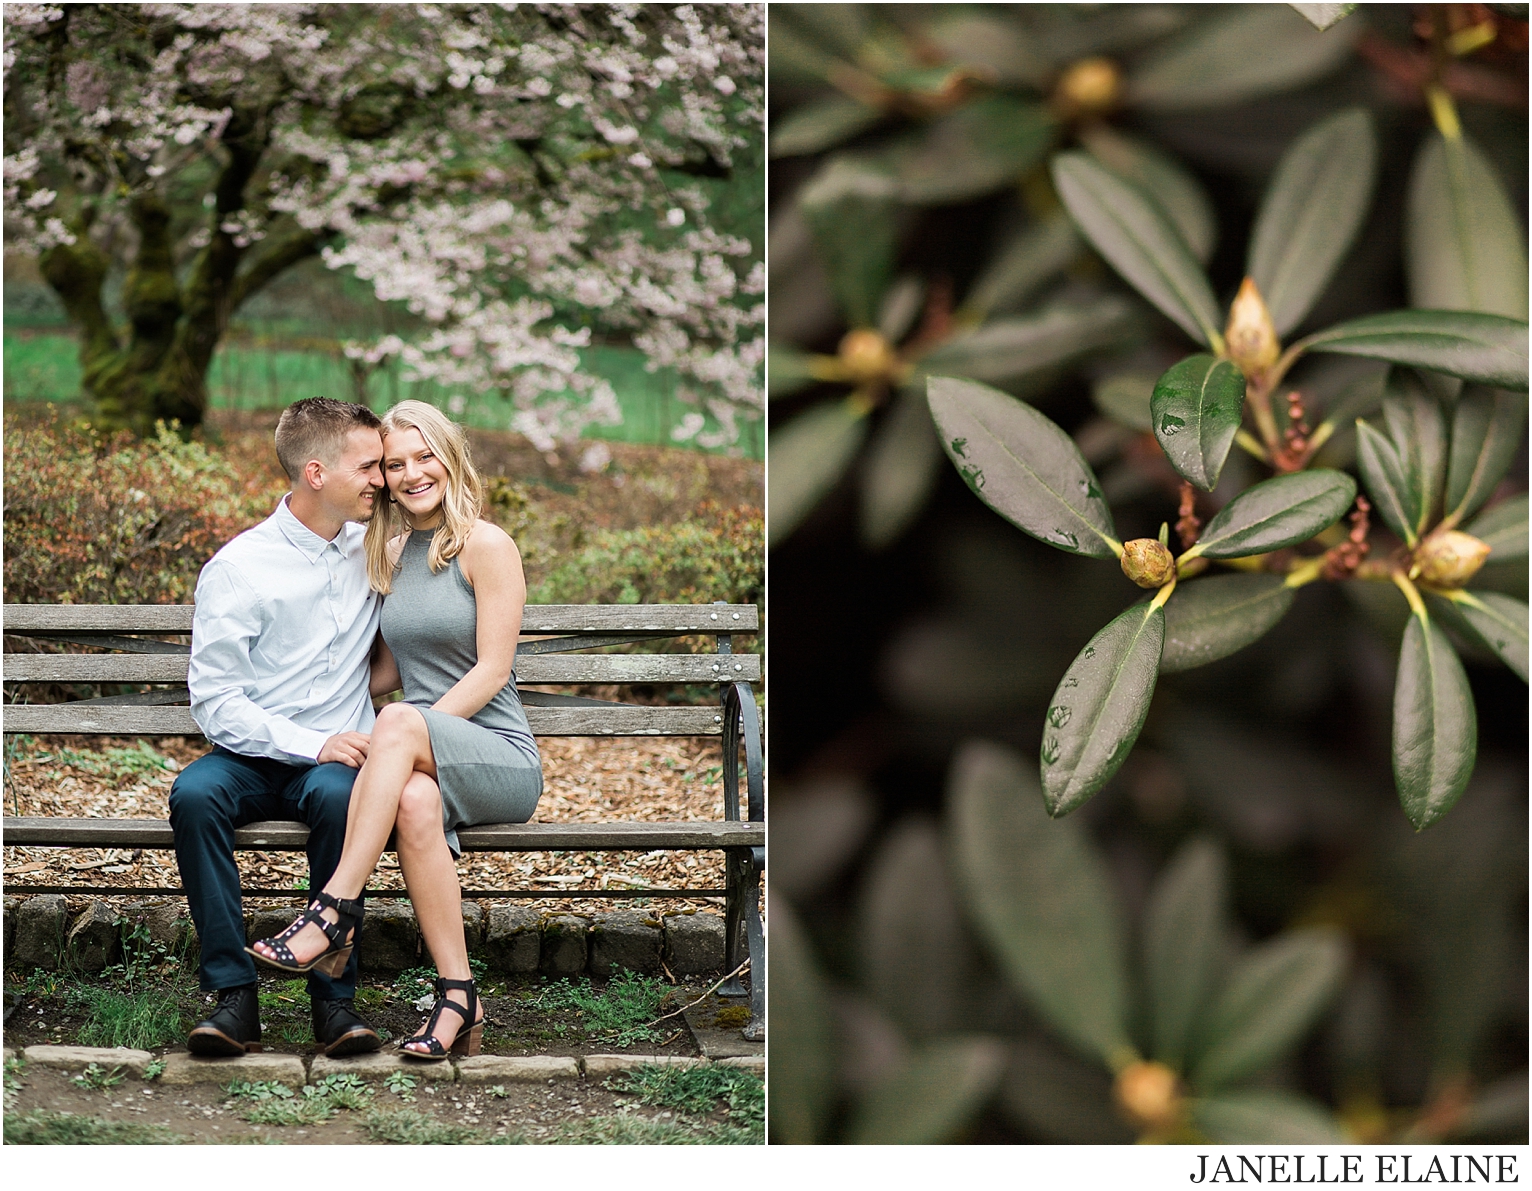 tricia and nate engagement photos-janelle elaine photography-3.jpg